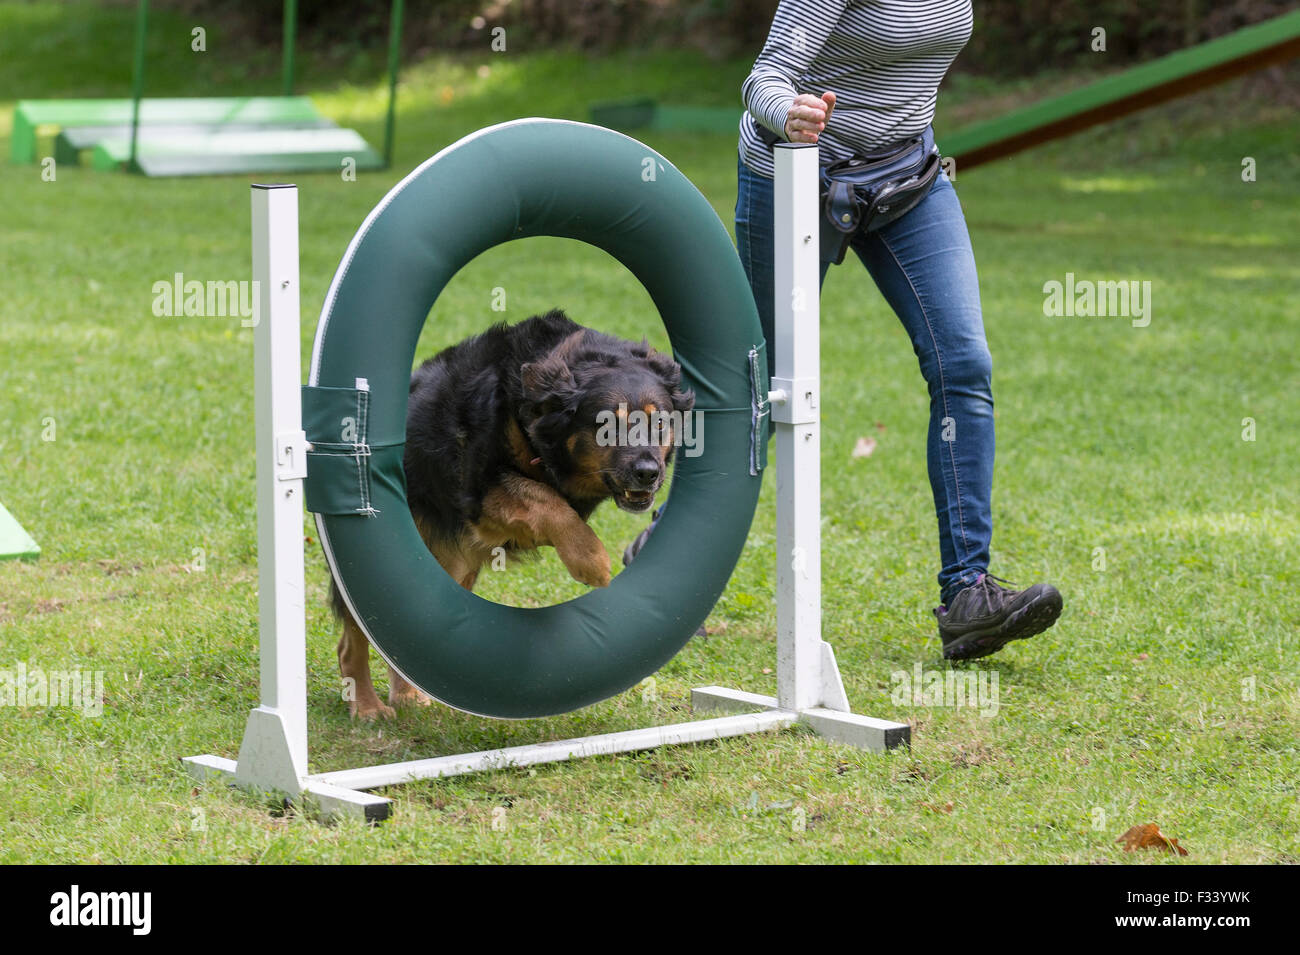 A mixed breed dog jumping through the tyre obstacle during agility training. Stock Photo